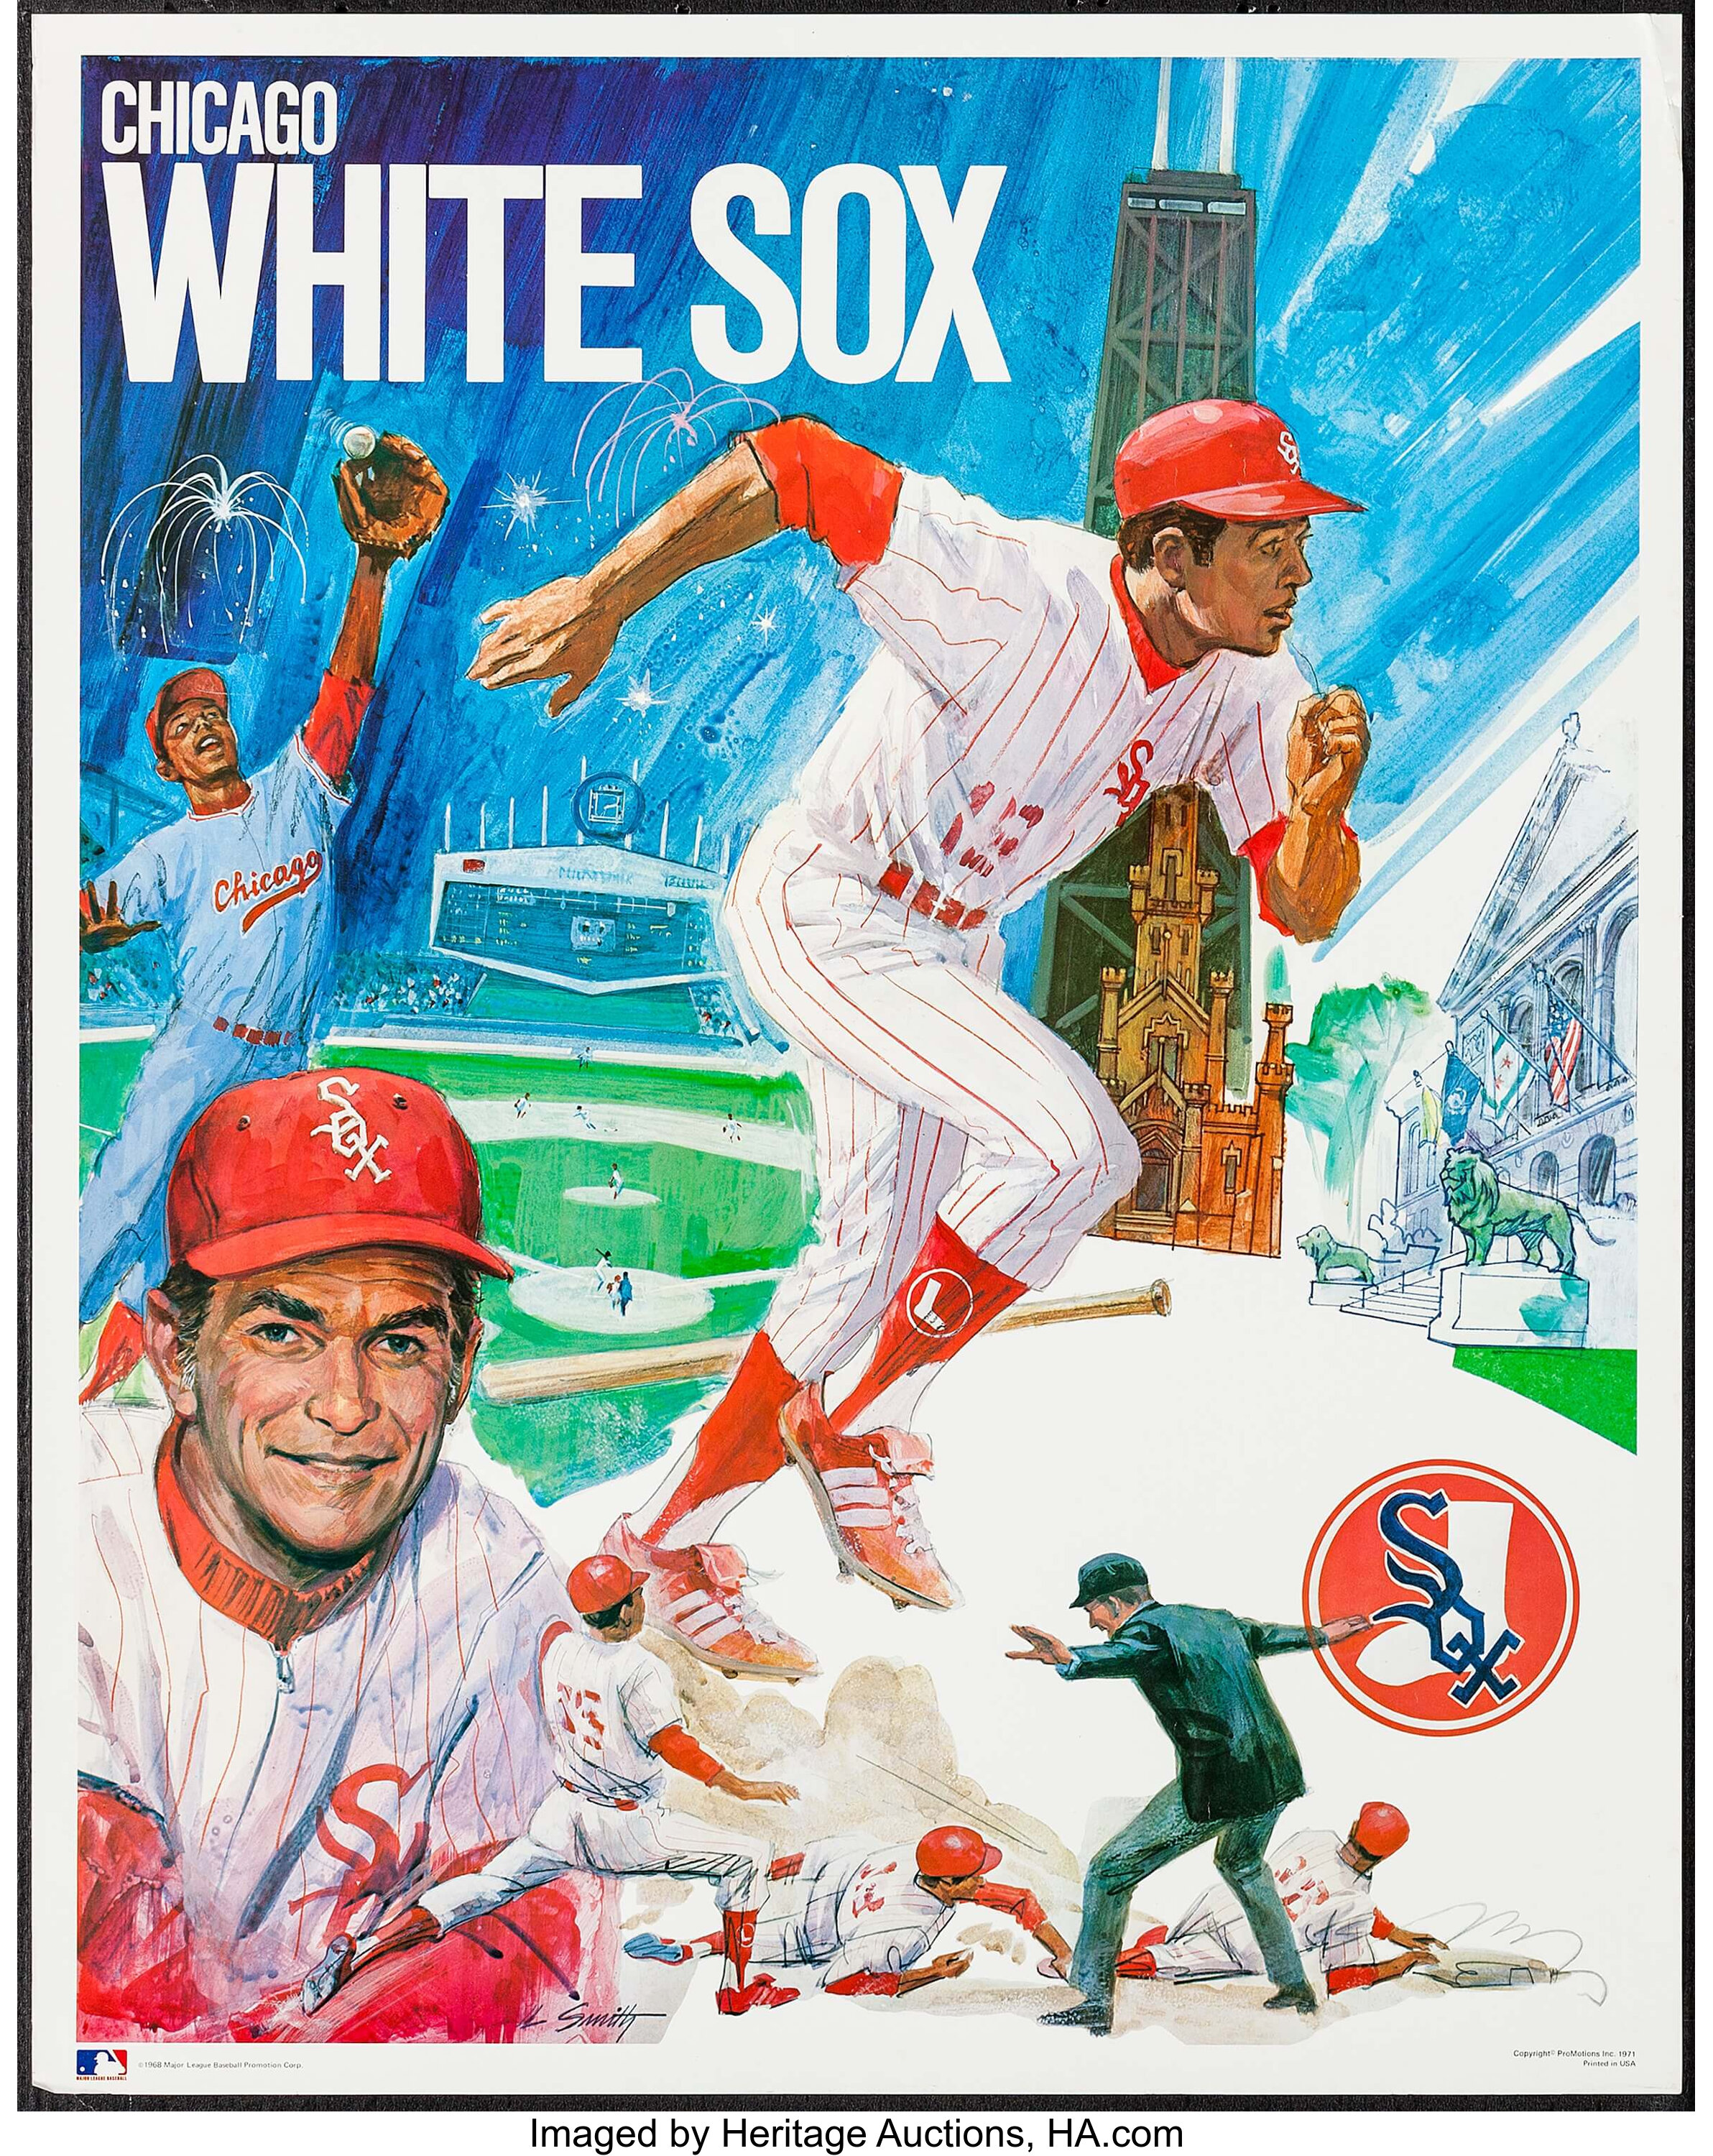 Chicago White Sox Baseball (ProMotions, 1971). Posters (8), Lot #51395